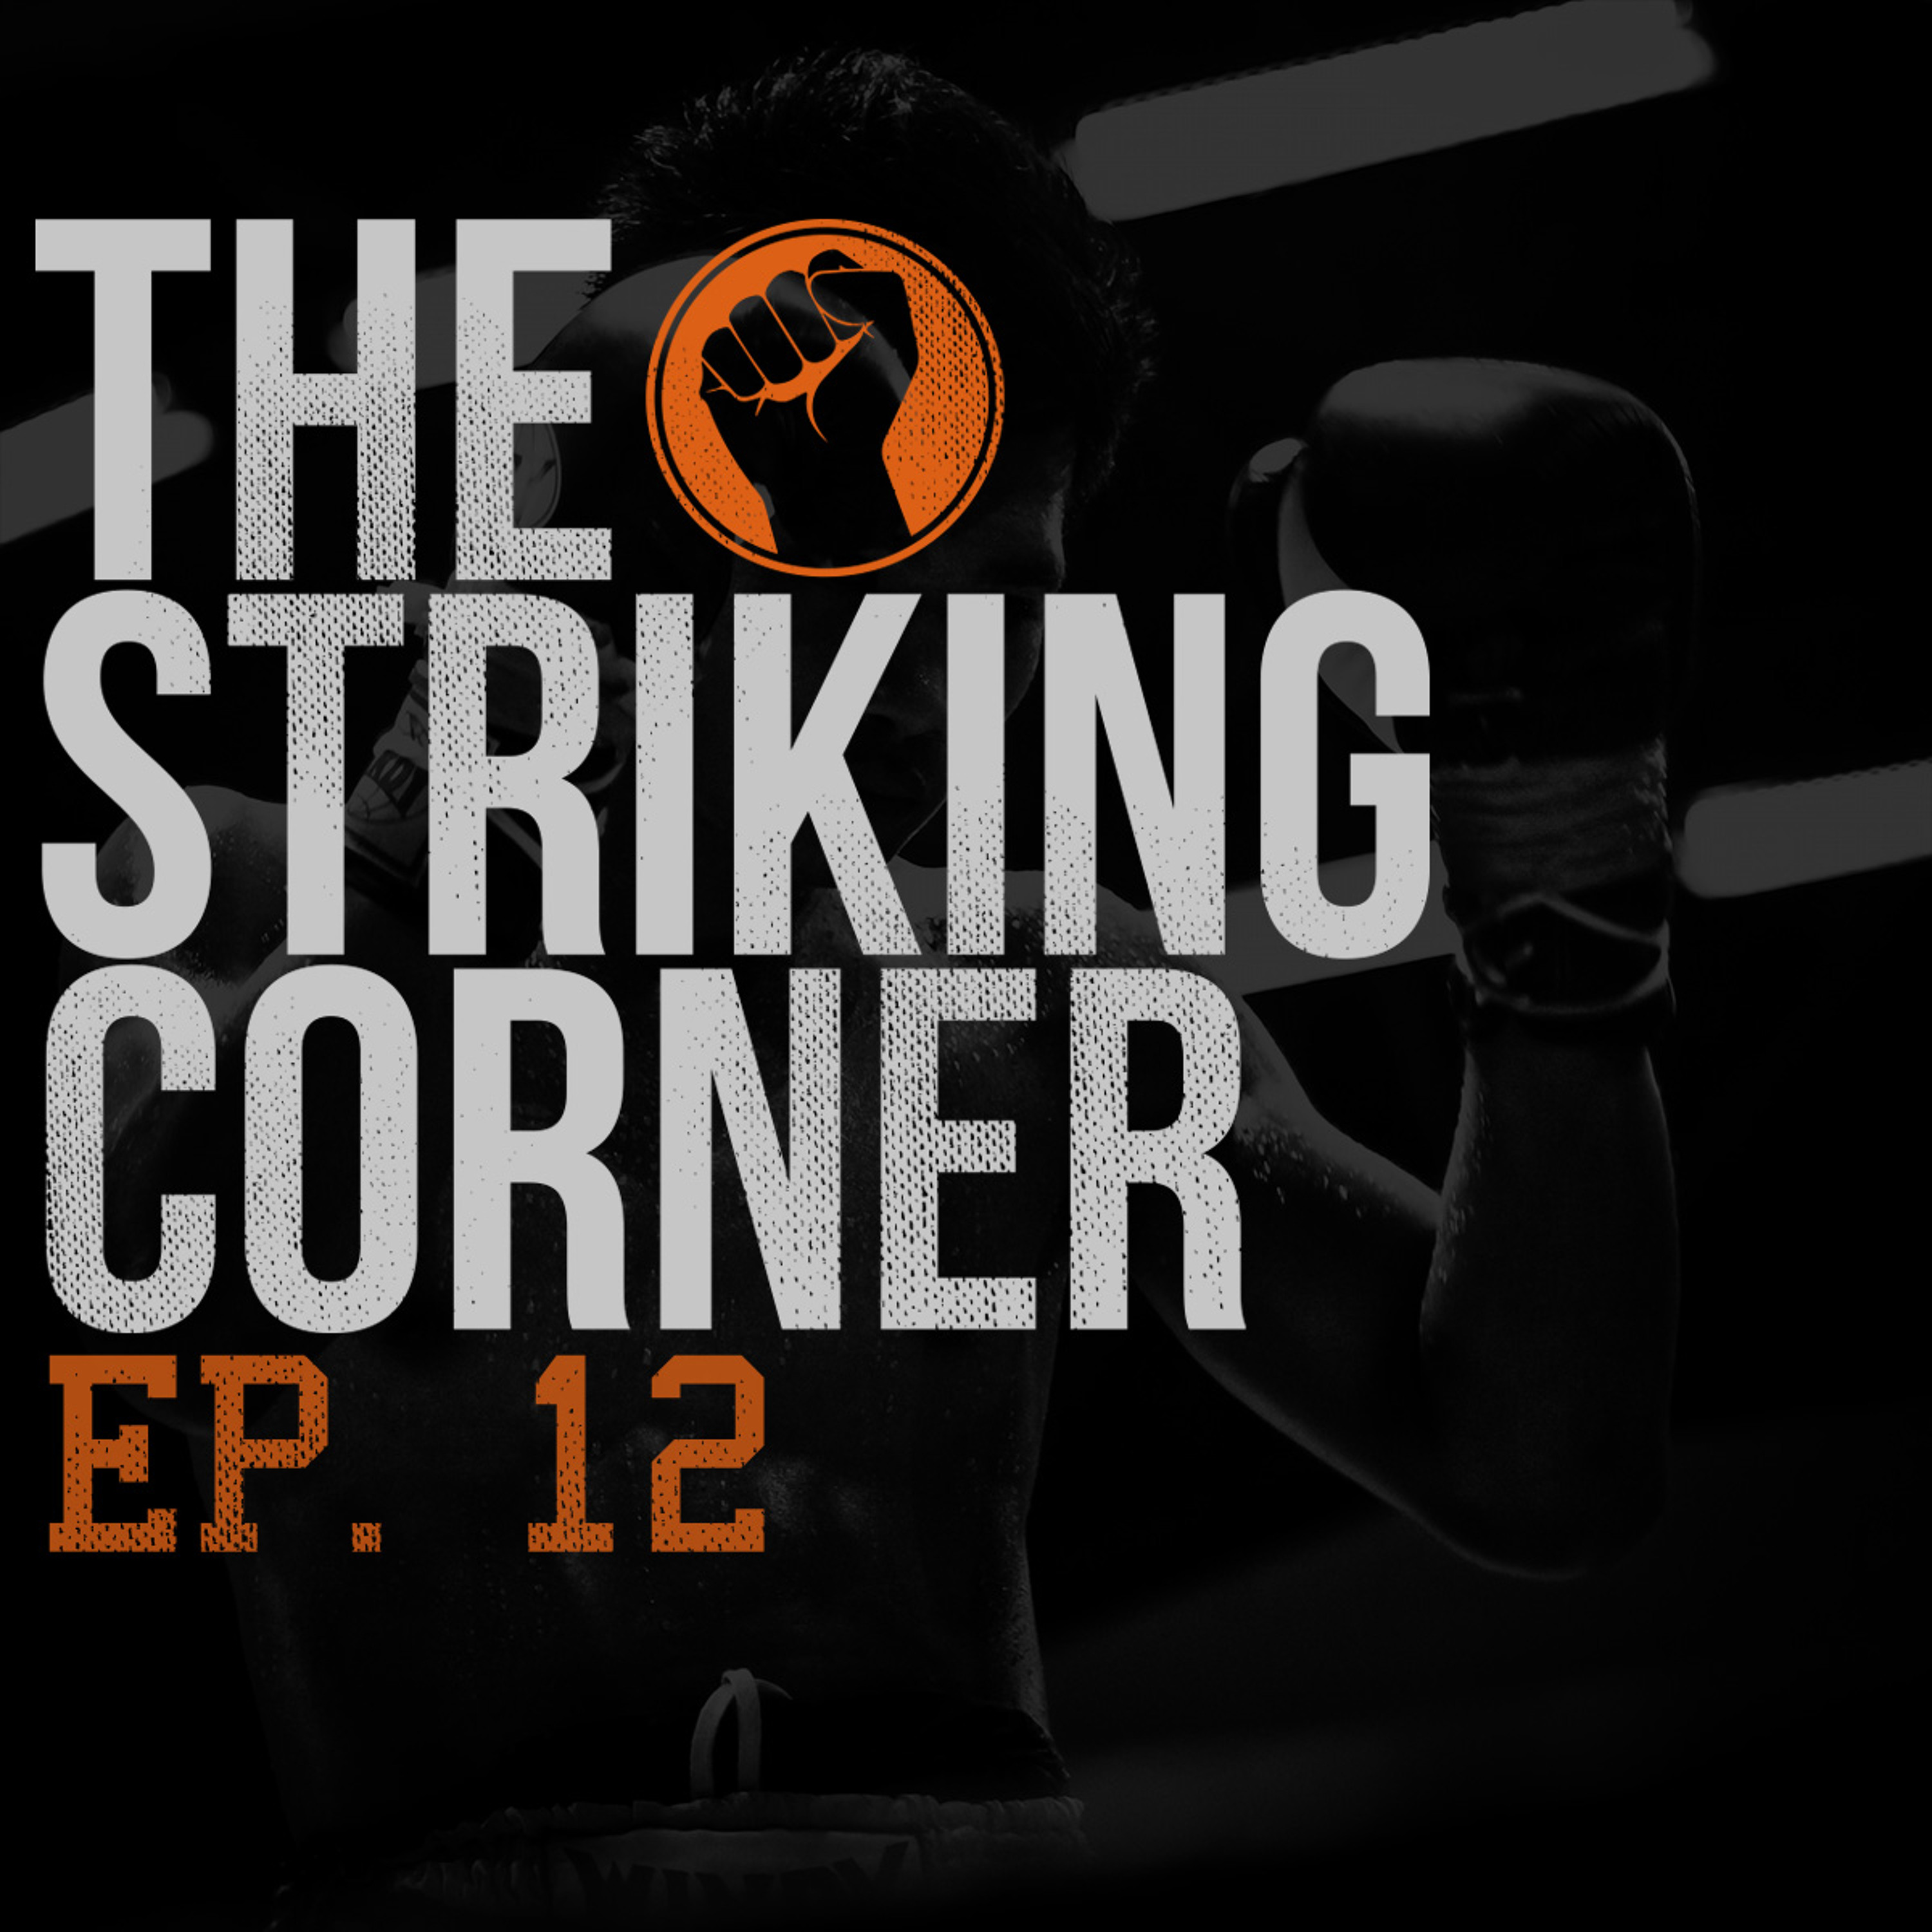 Ep. 12 - Legacy Kickboxing review and more!